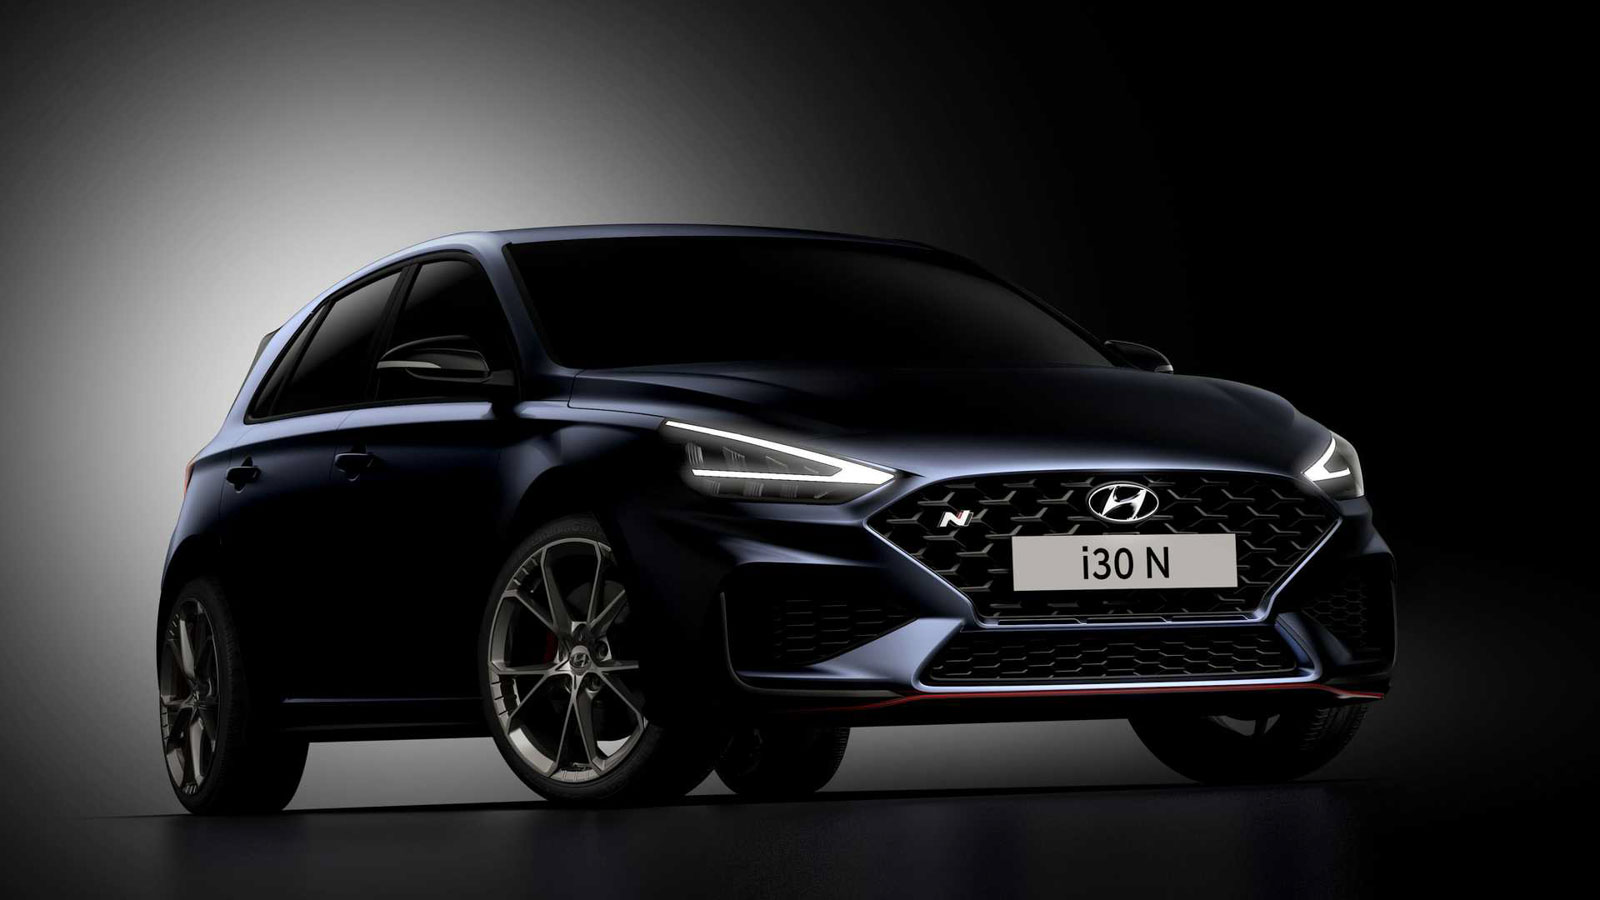 2021 Hyundai i30 N Teased For The First Time Ahead Of Launch